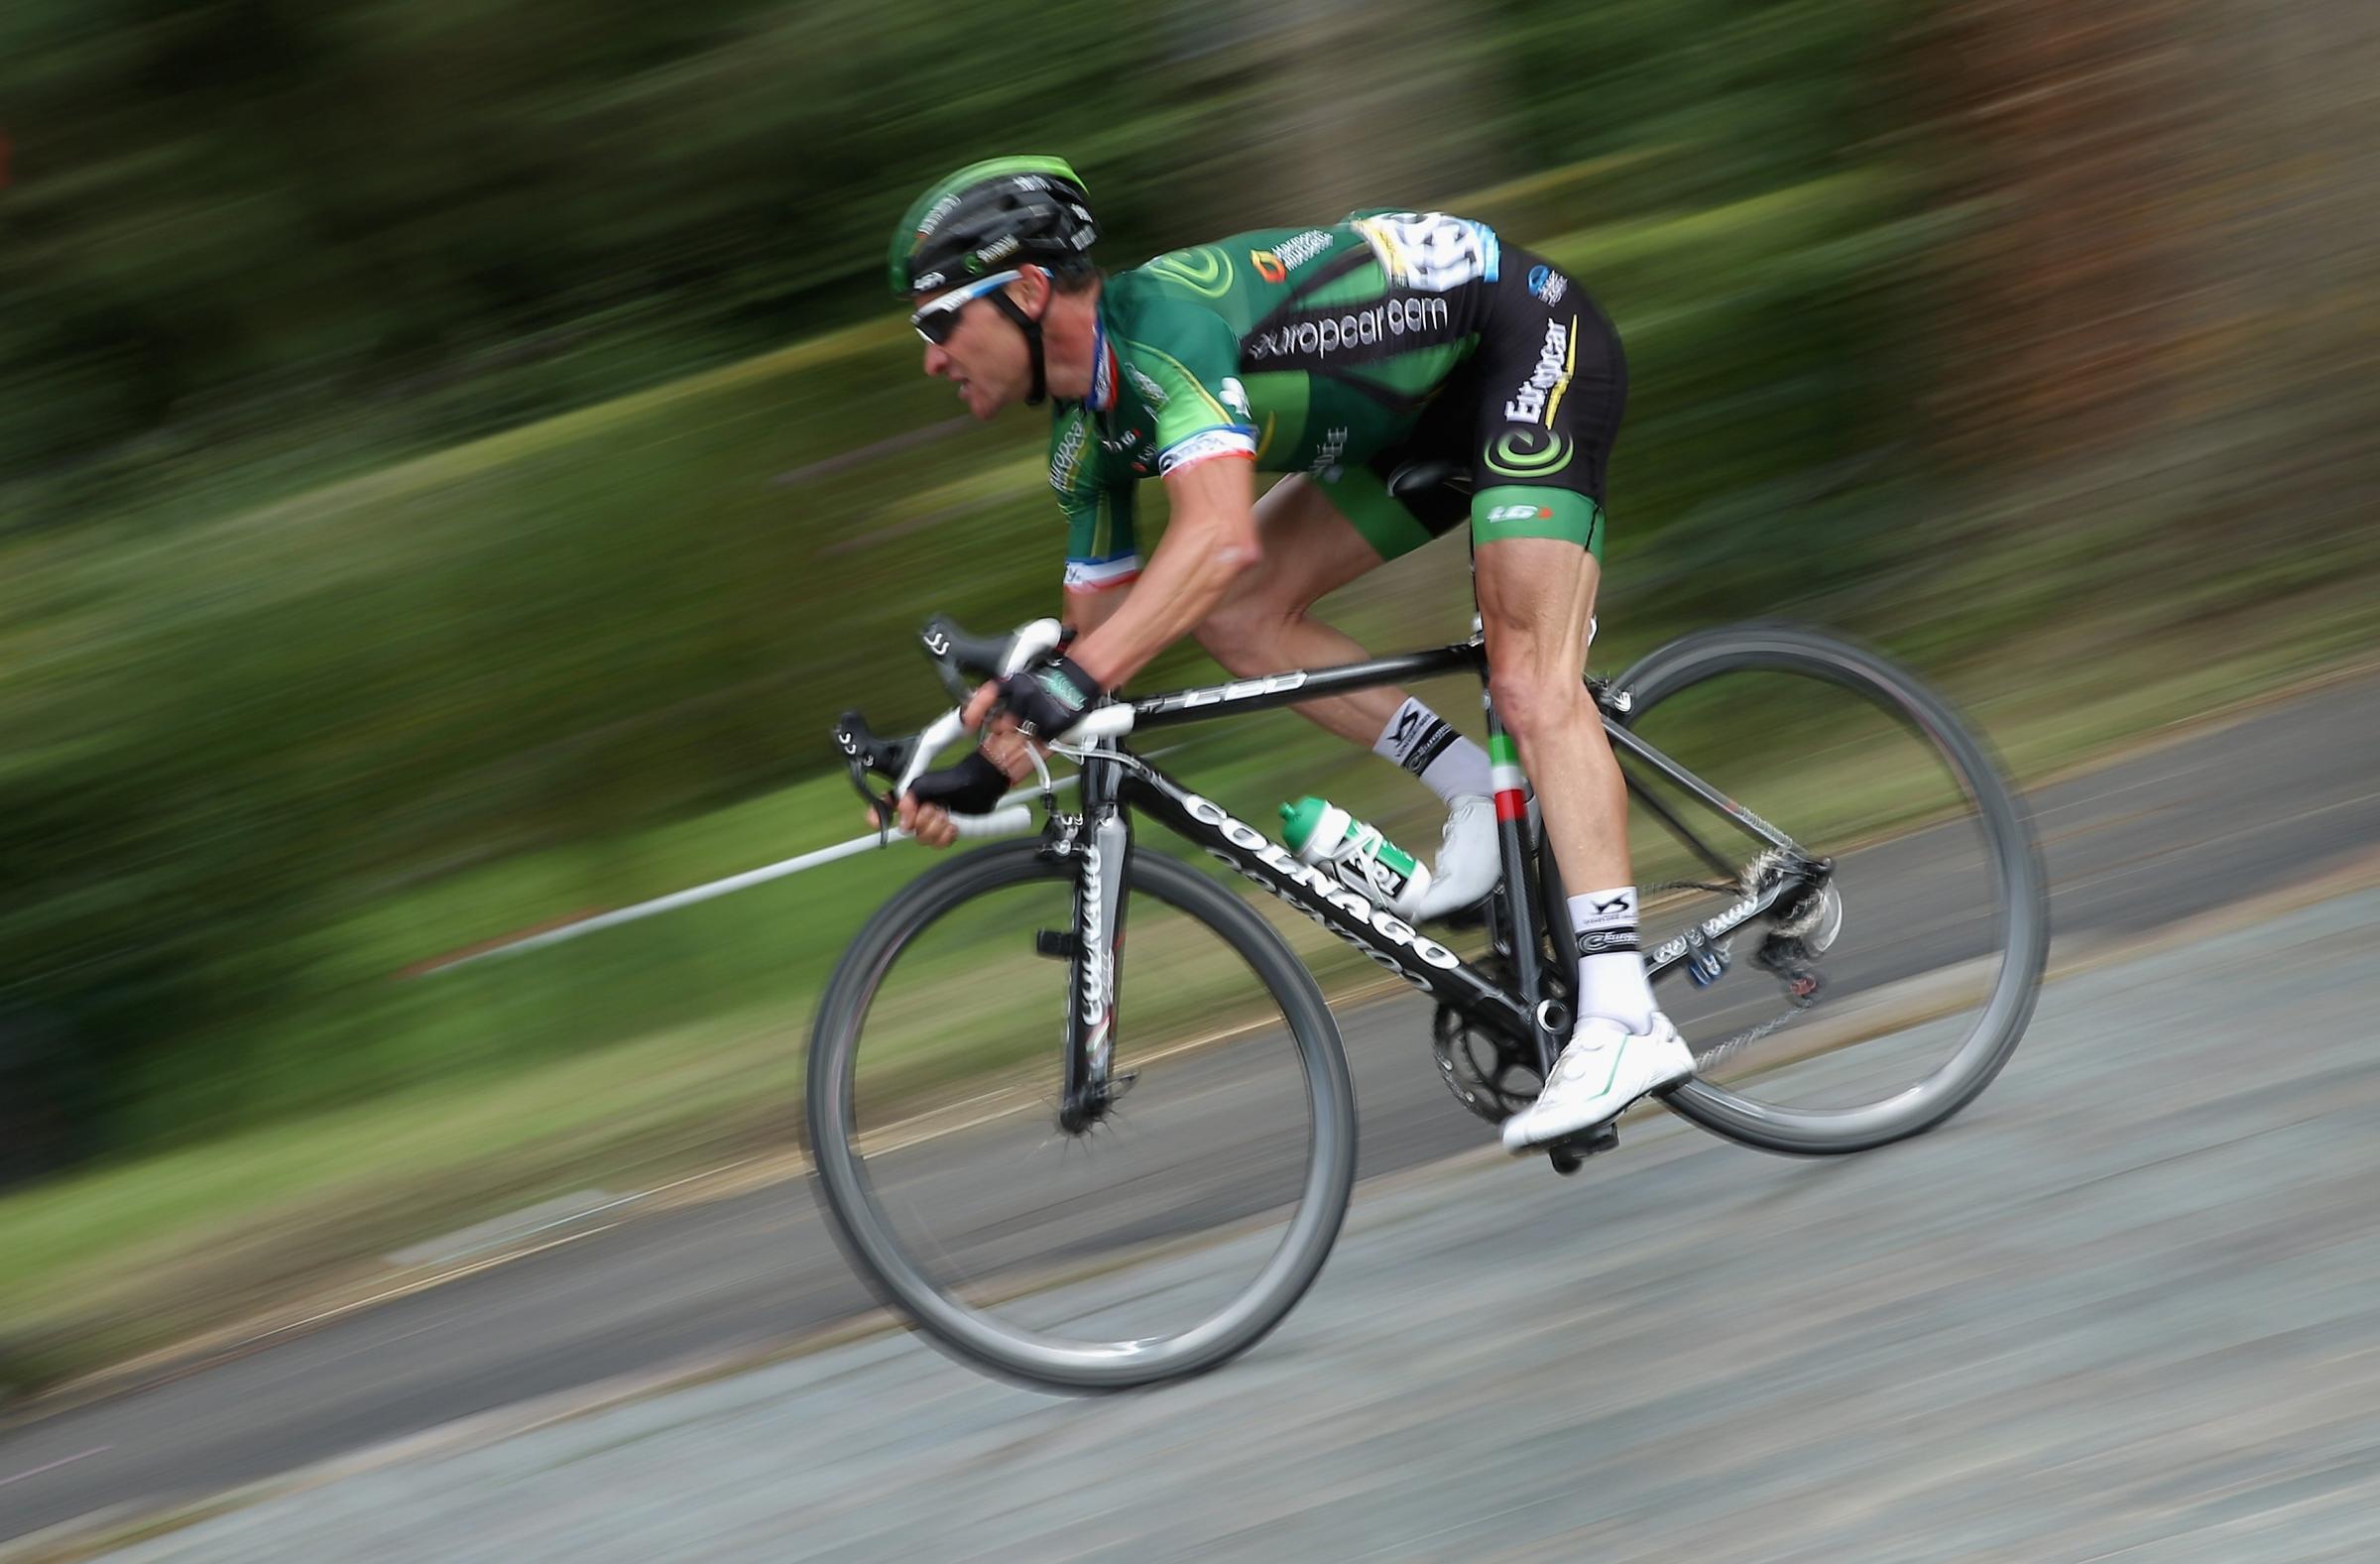 Thomas Voeckler of France and Team Europcar descends on the cobblestone streets during stage four of the 2014 Tour de France from Touquet-Paris-Plage to Lille on July 8, 2014 in Cassel, France.